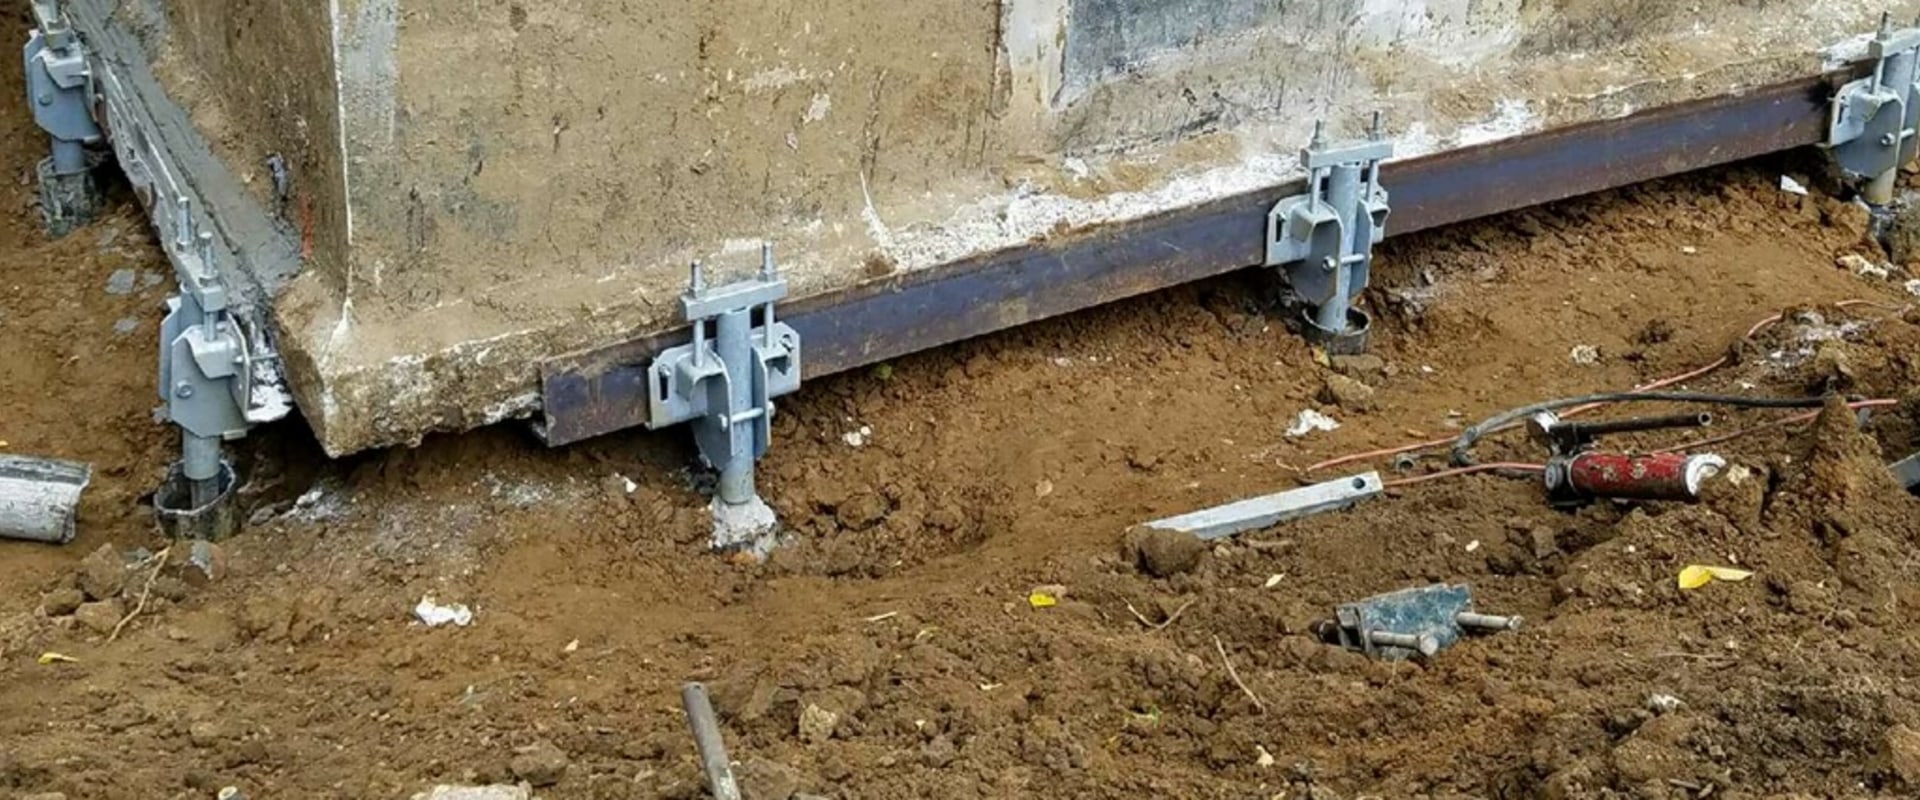 Underpinning with Steel Piles: What You Need to Know